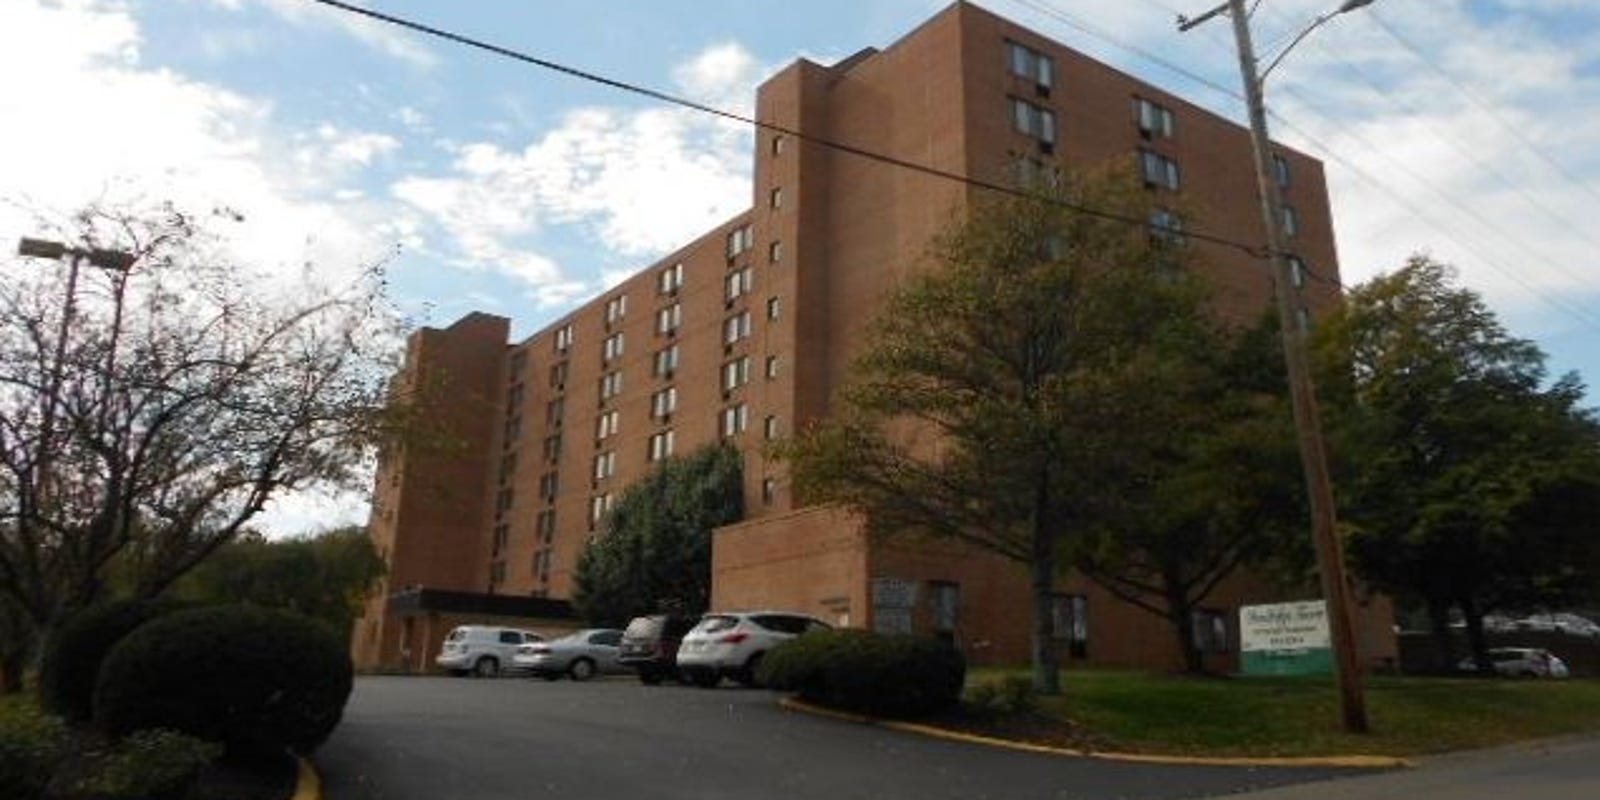 South Nashville Subsidized Apartments For Seniors Being Sold